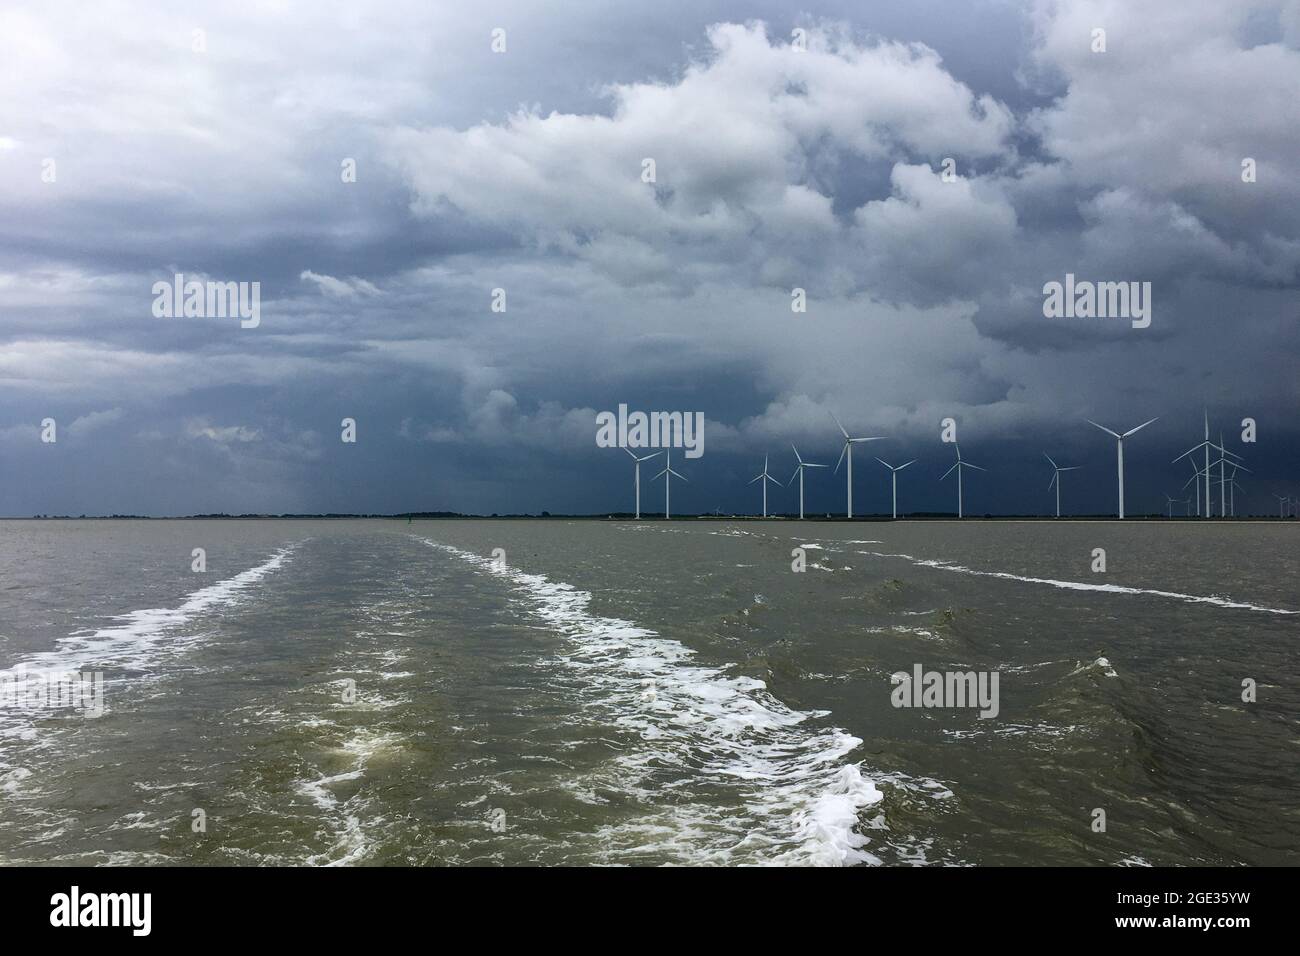 River Ems Mouth between Germany and Netherland with the Dutch Coast near Delfzijl with wind turbines a storm approaching. Shot from a boat. Stock Photo